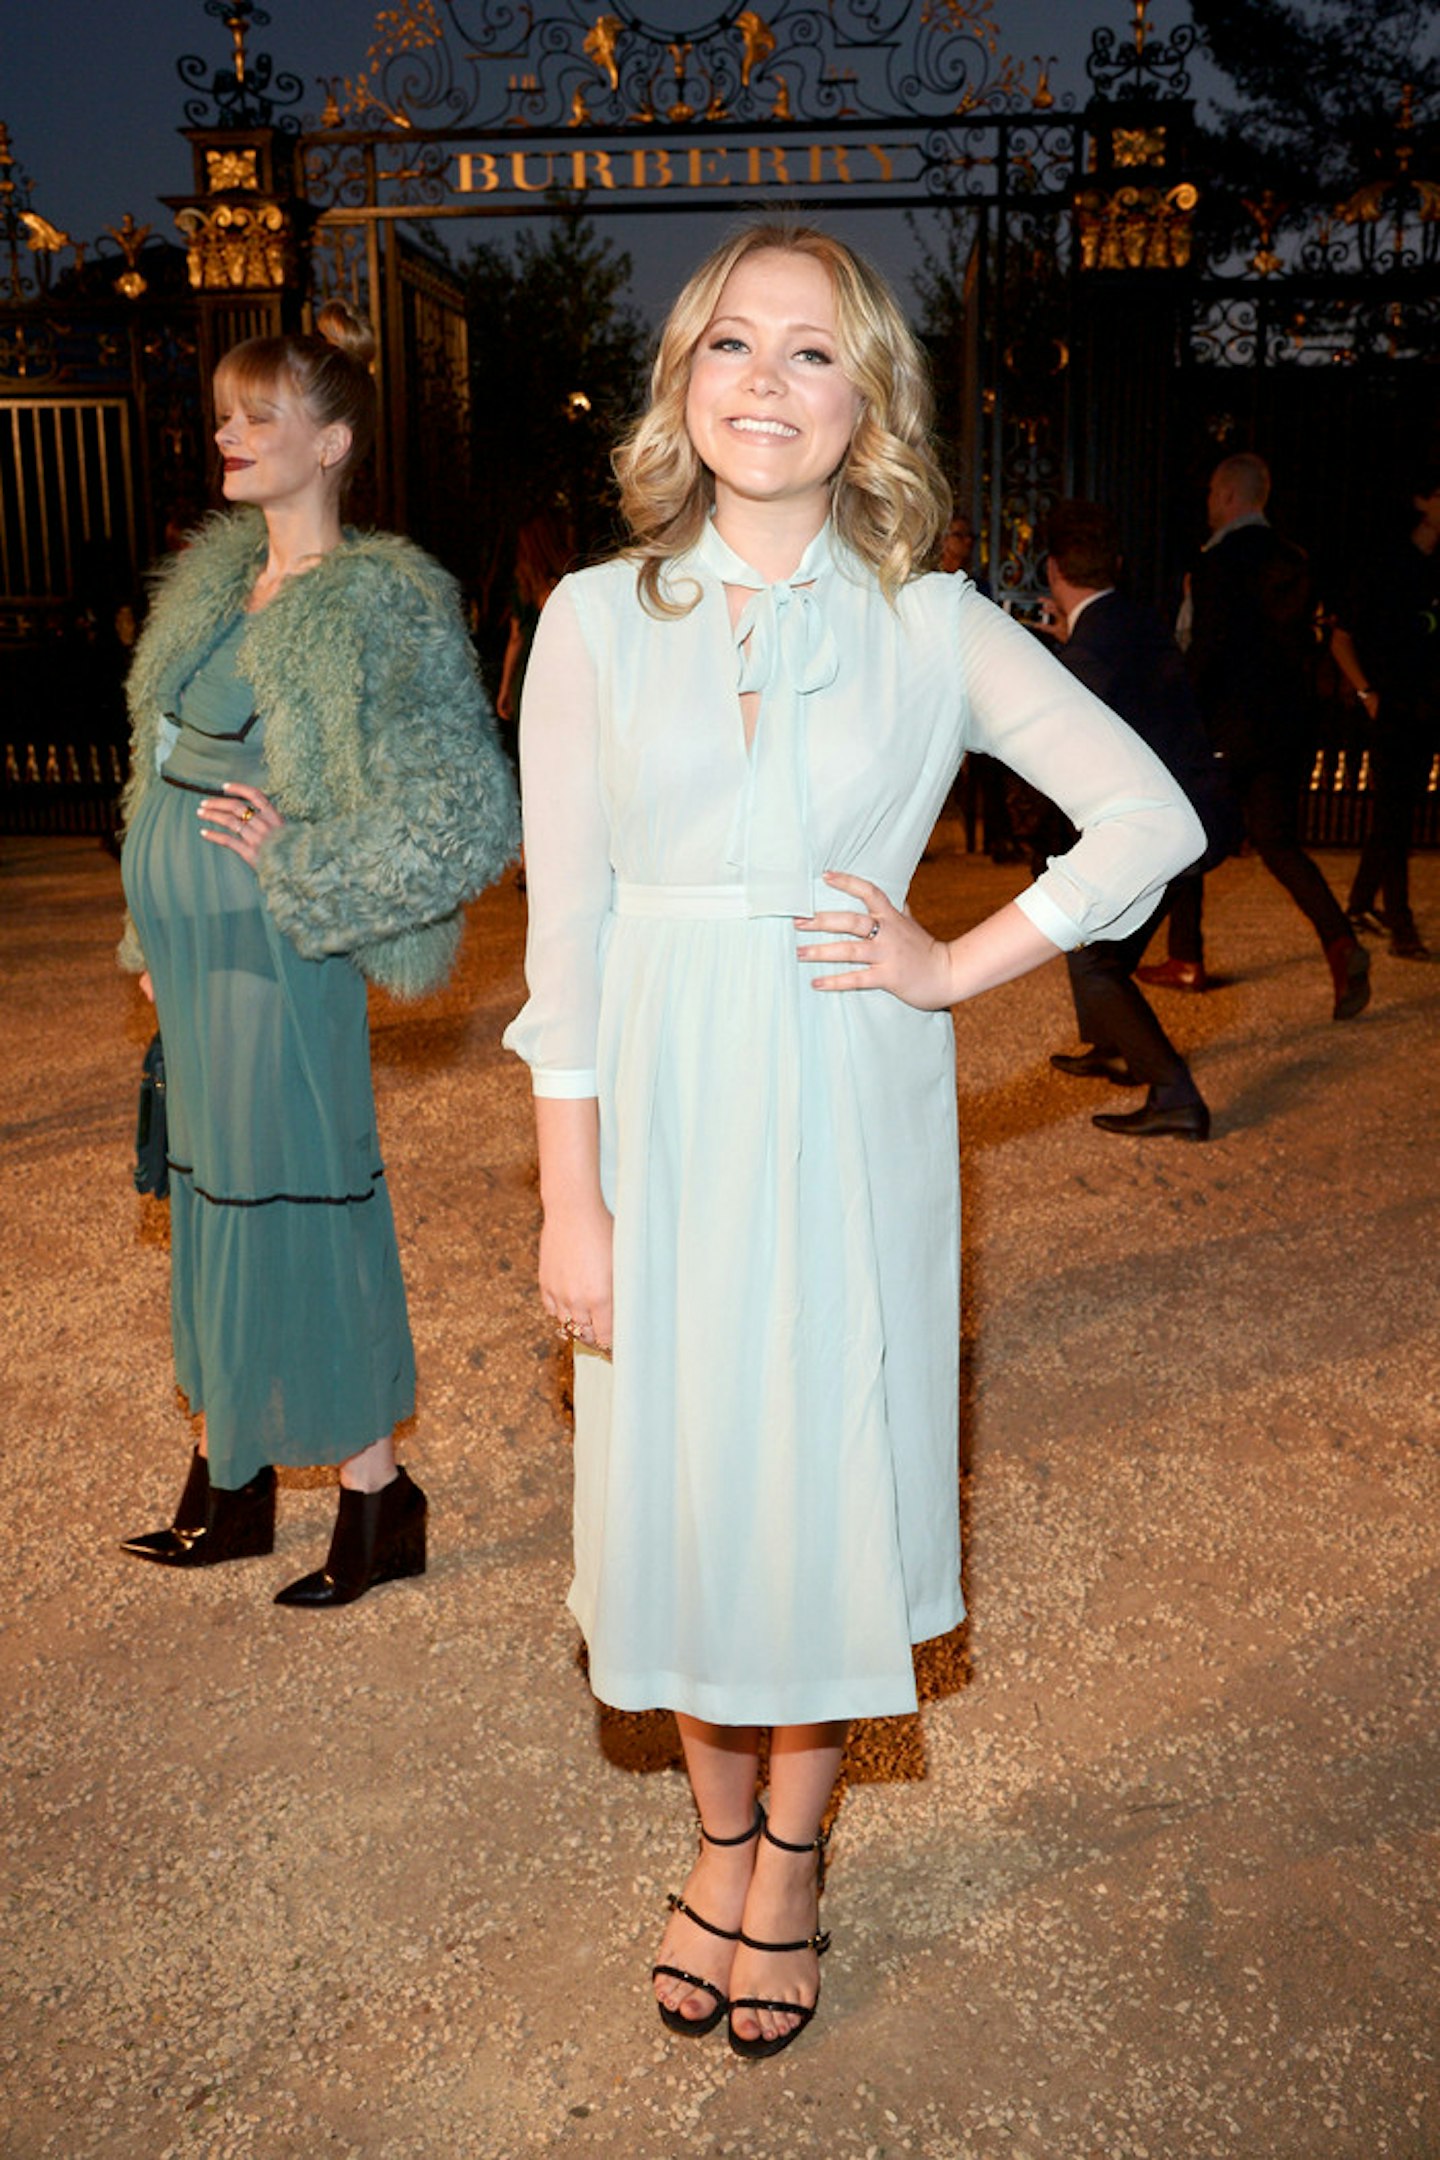 Poppy Jamie wearing Burberry at the Burberry _London in Los Angeles_ event